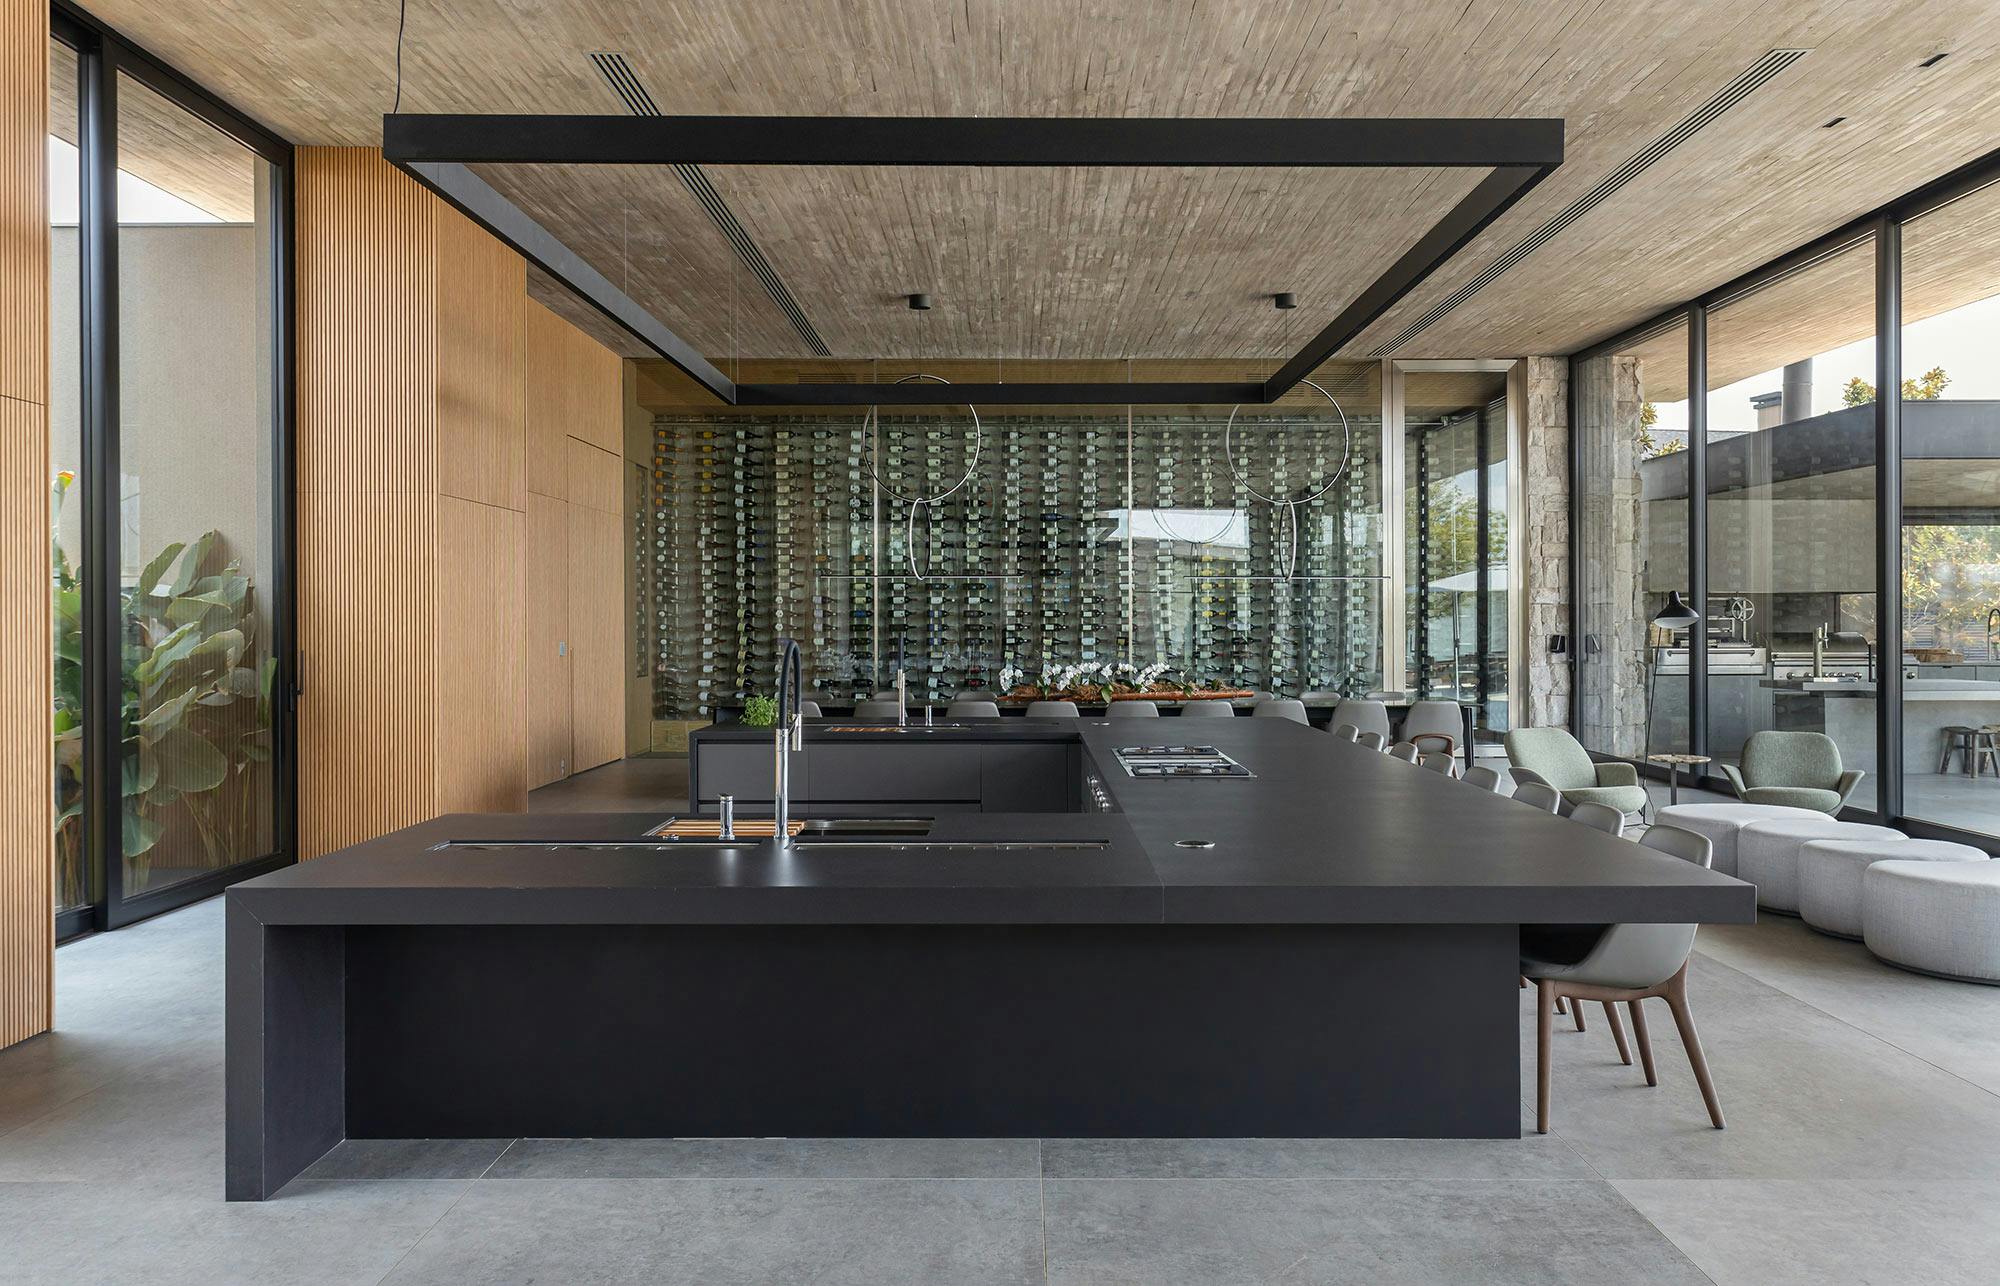 A brutalist and industrial style house in Brazil with unique Cosentino finishes